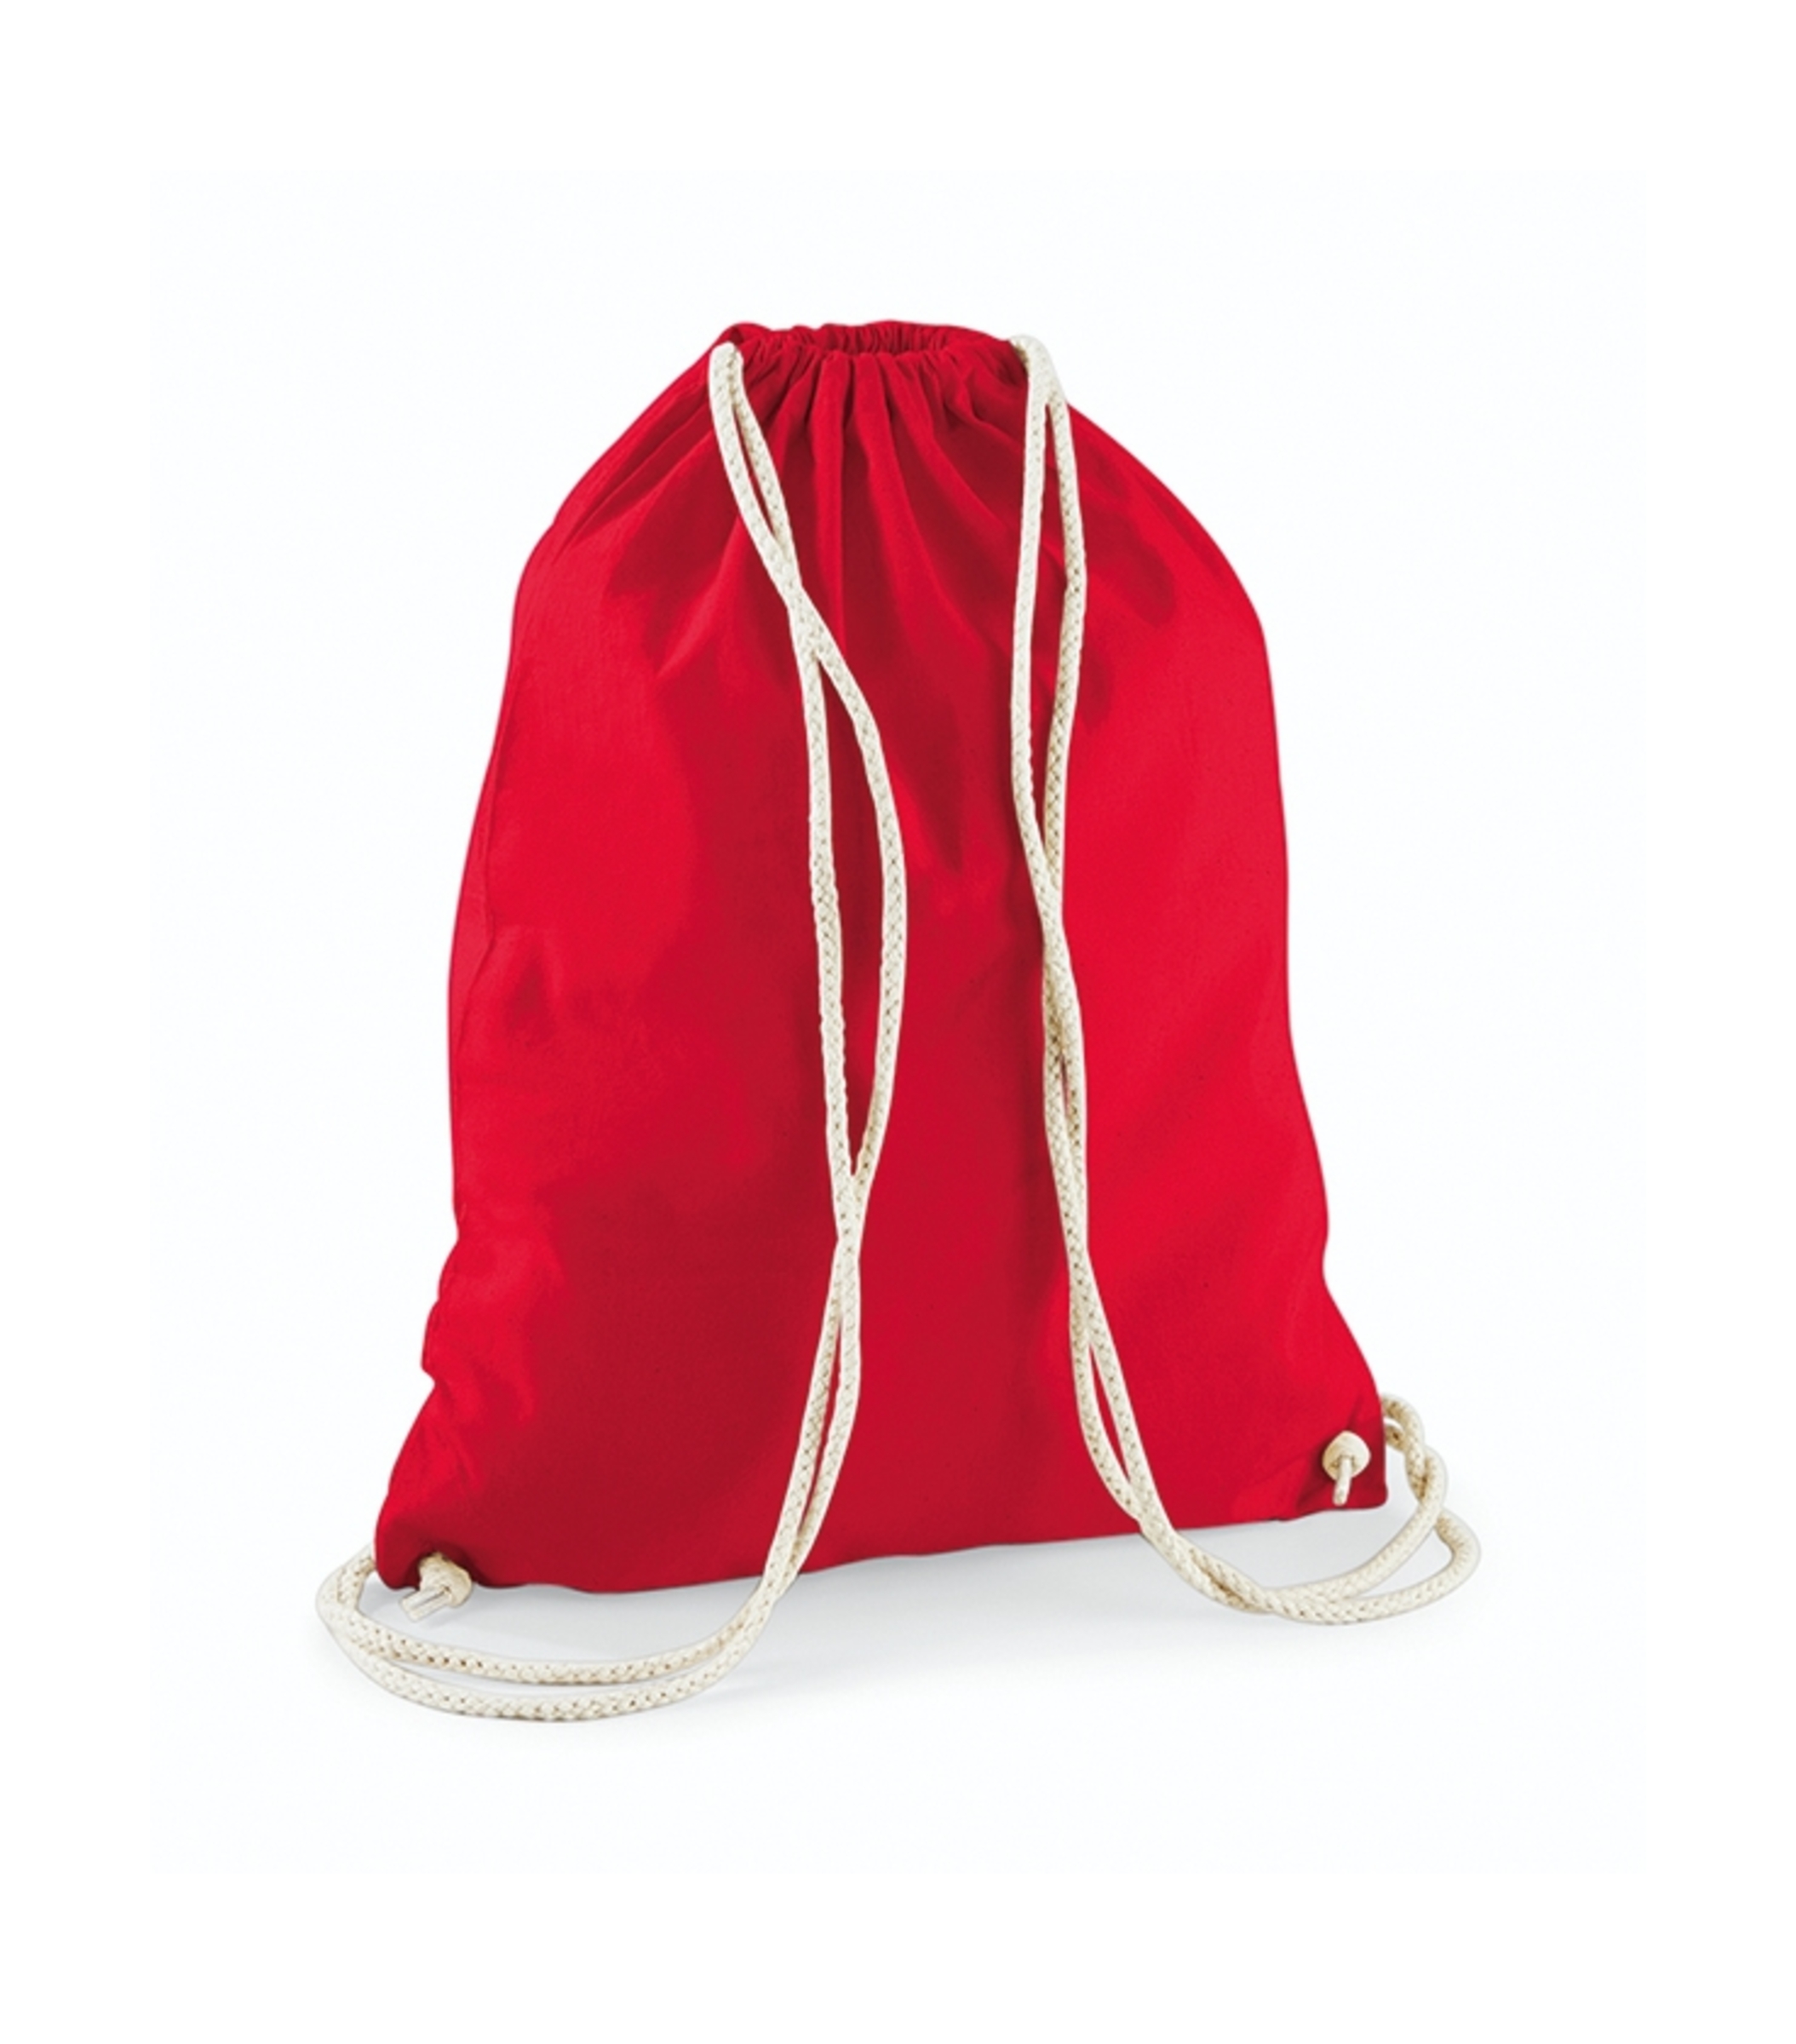 Westford Mill Cotton Gymsack - Classic Red - One Size